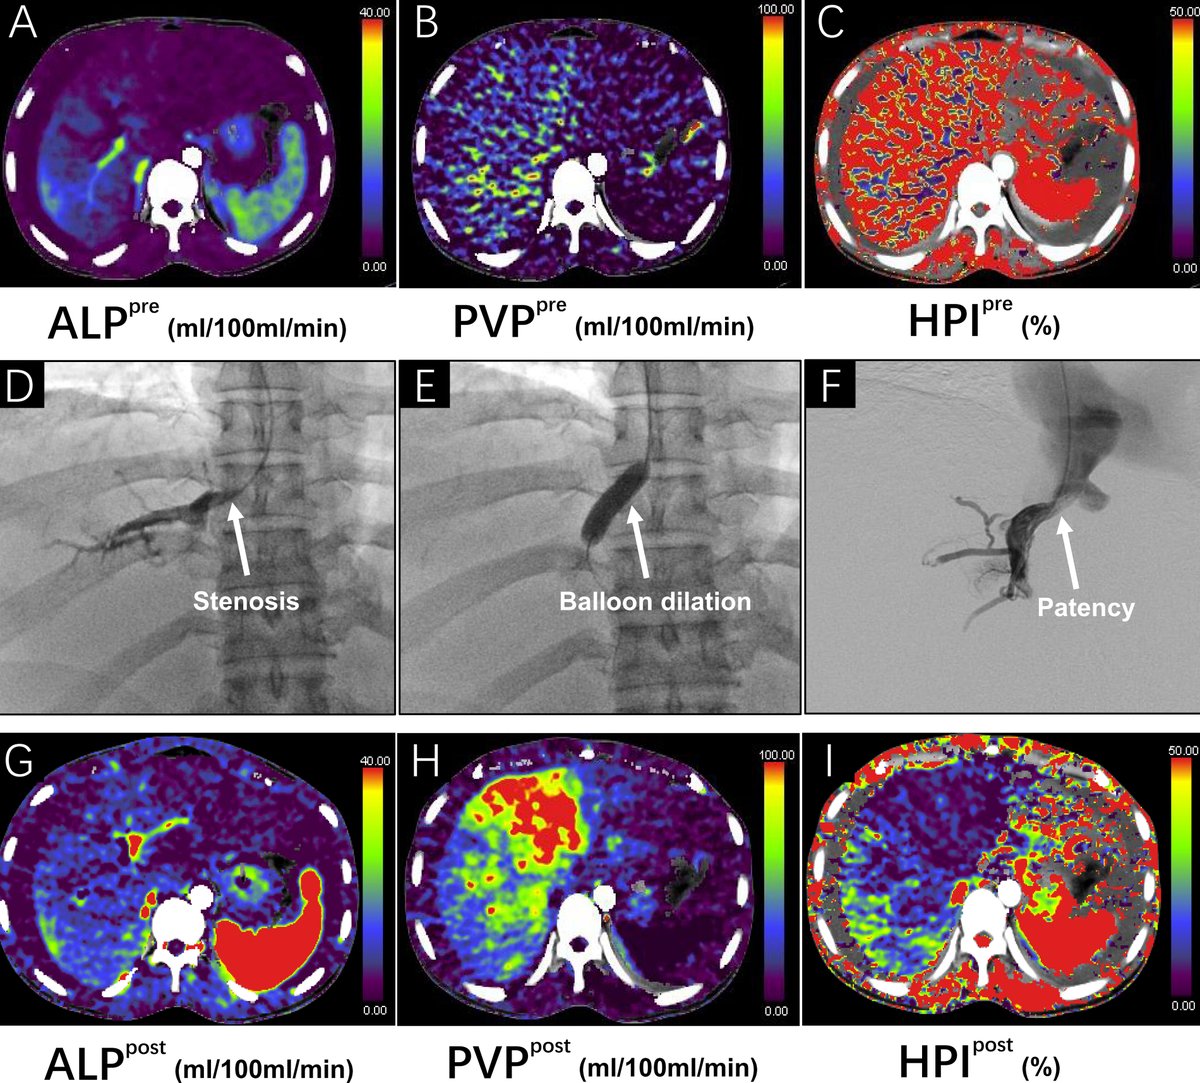 CT images before interventional therapy show reduced arterial liver perfusion, decreased portal venous perfusion, and elevated hepatic perfusion index. DSA confirmed stenosis of left hepatic vein and successful restoration of vessel patency. bit.ly/4aCi6QD